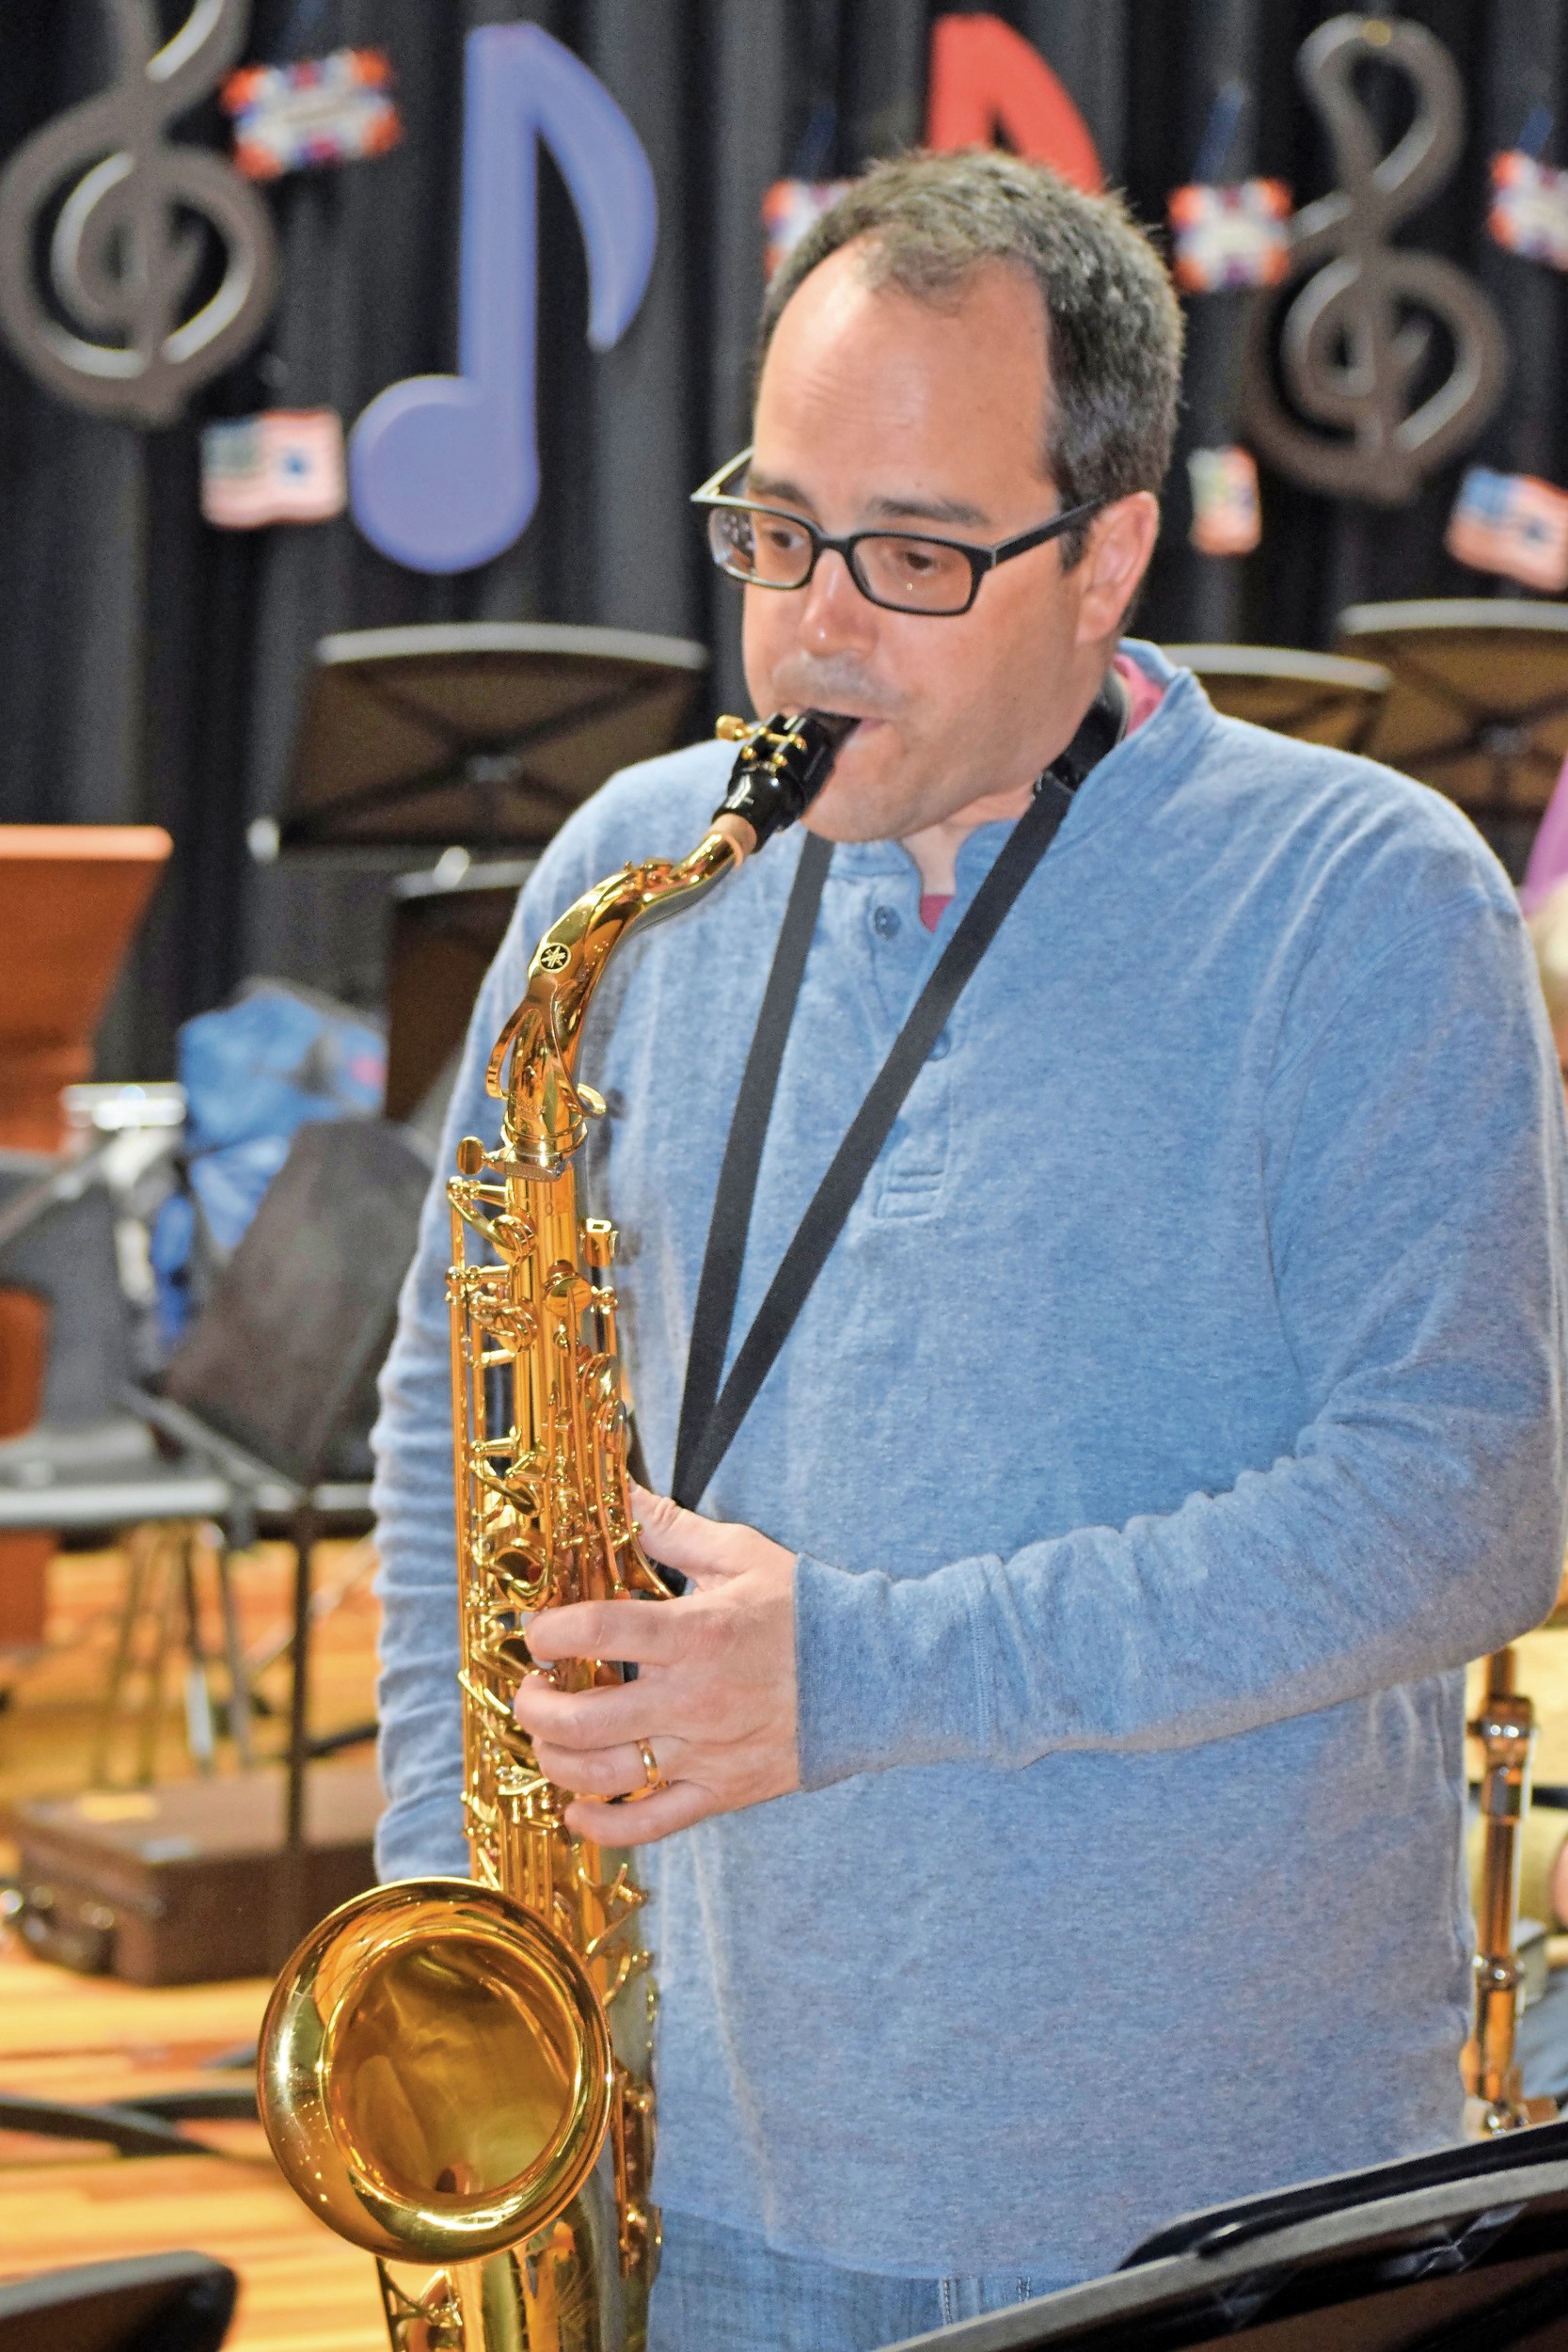 Christopher D’Orio has played the tenor saxophone in the Seaford Community Jazz Band for four years.